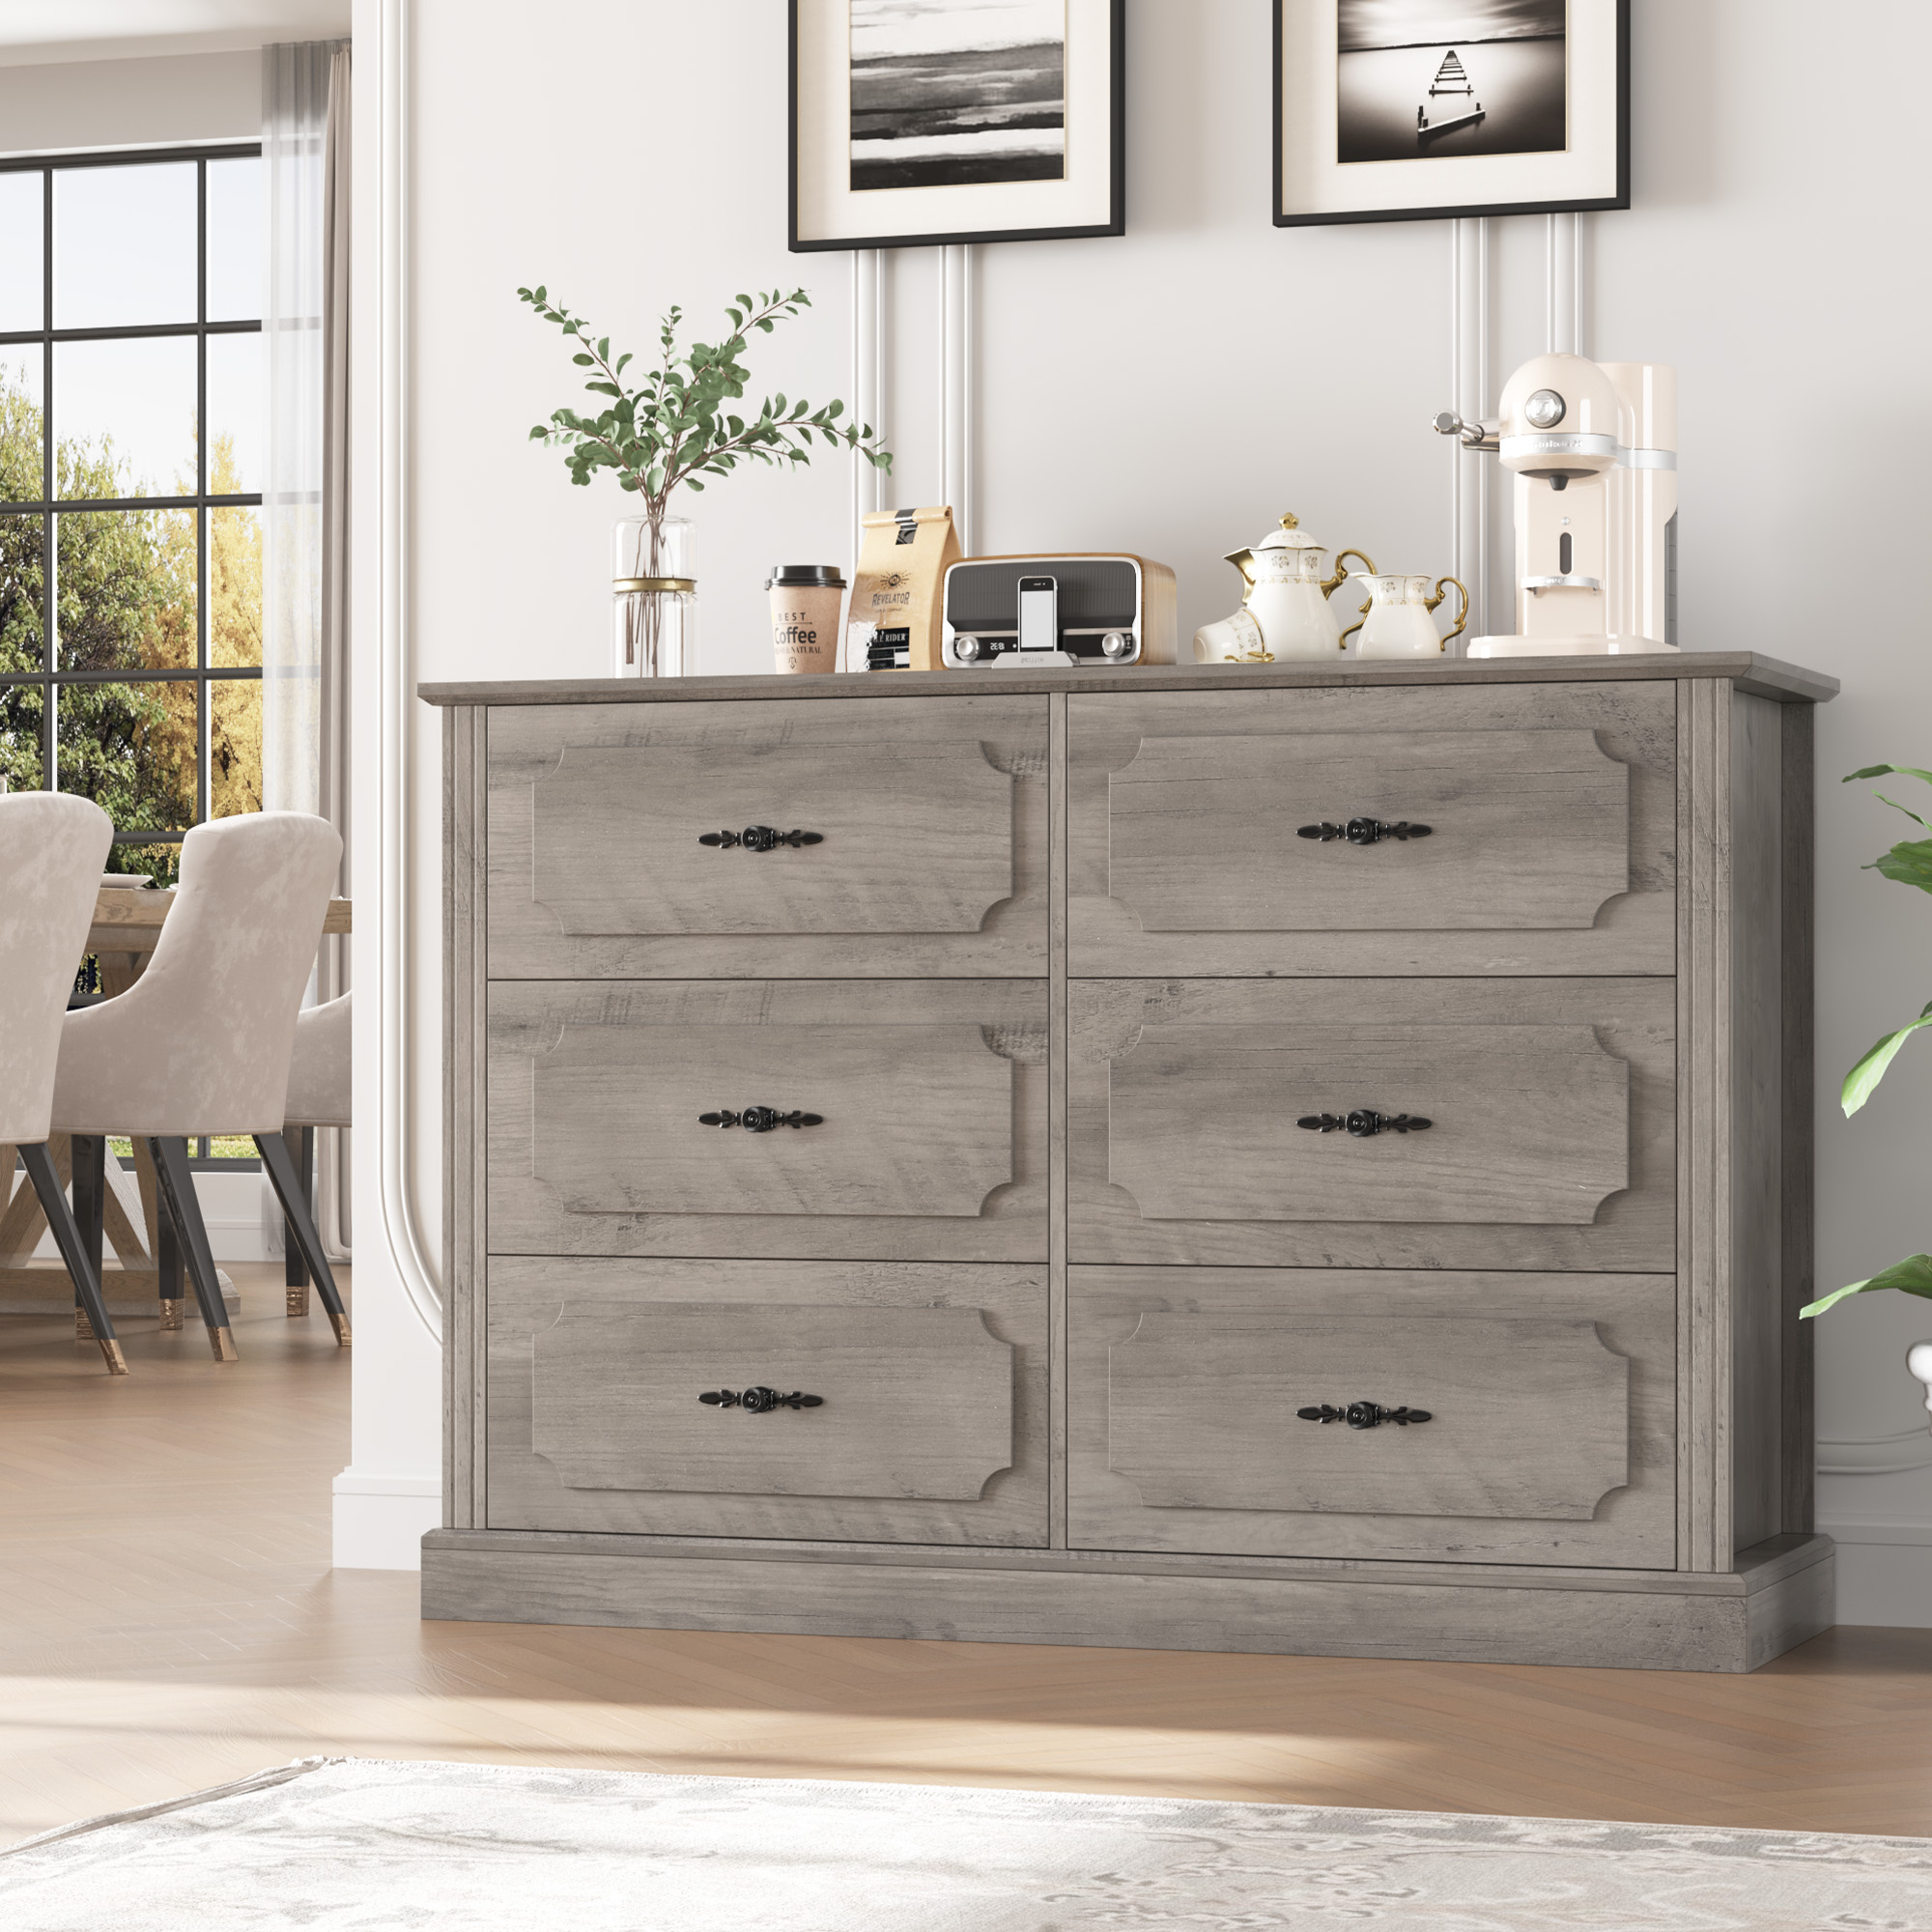 Homfa 6 Drawer Double Bedroom Dresser, Vintage Wood Storage Cabinet Large Drawer Chest for Living Room, Easy to Clean Top, Wash Gray - image 3 of 7